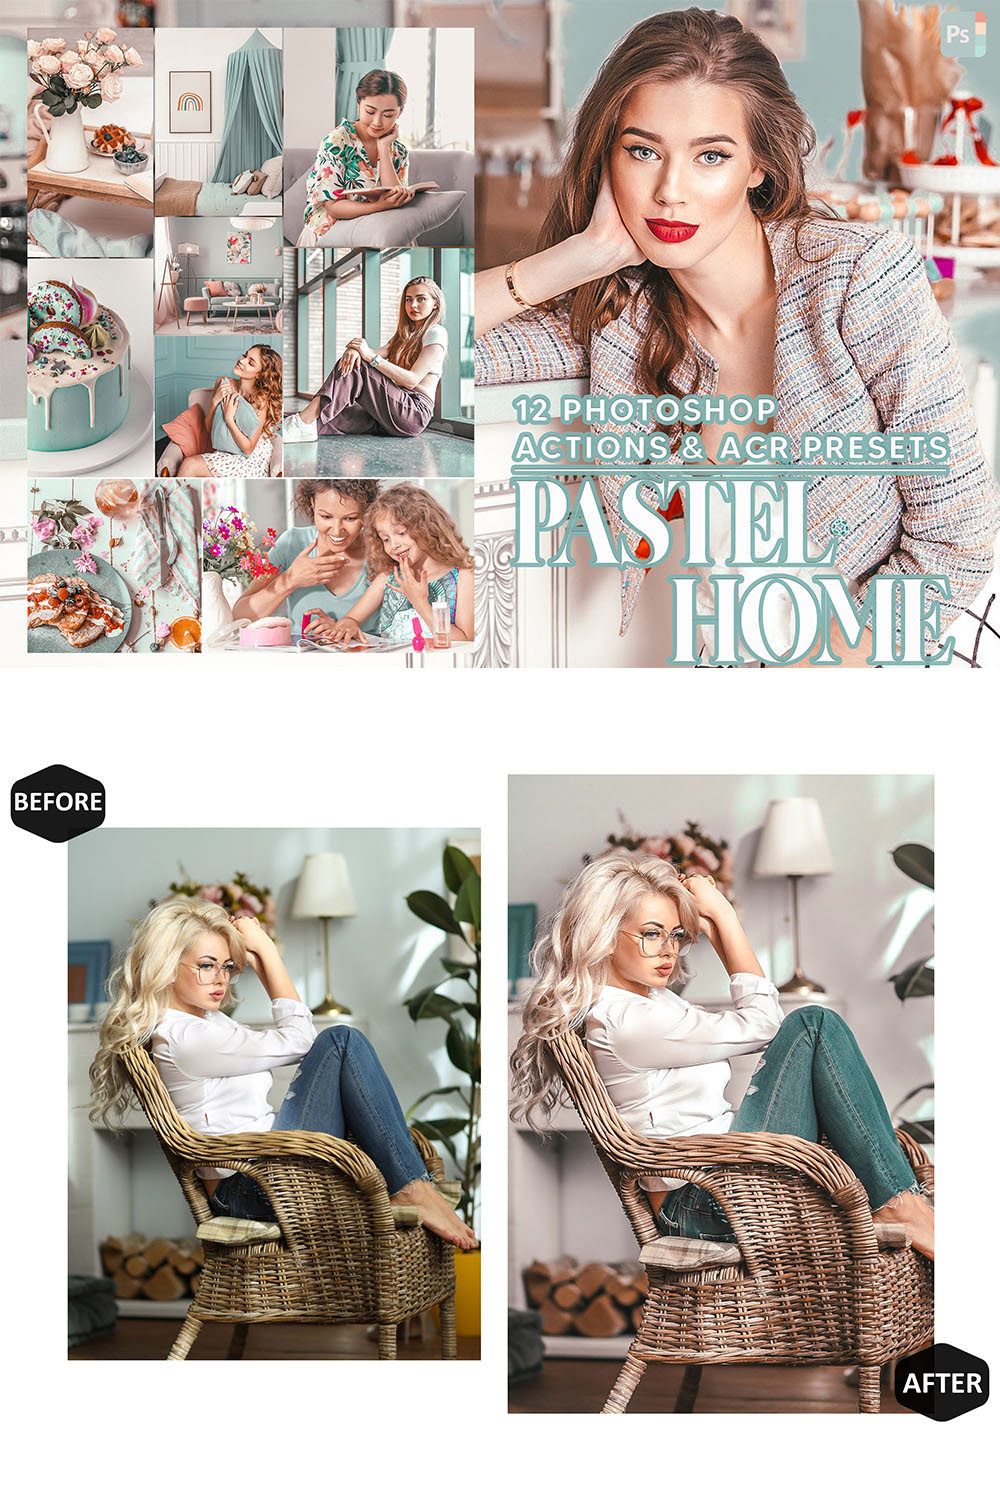 12 Photoshop Actions, Pastel Home Ps Action, Soft Skin ACR Preset, Bright Summer Ps Filter, Atn Portrait And Lifestyle Theme For Instagram, Blogger pinterest preview image.